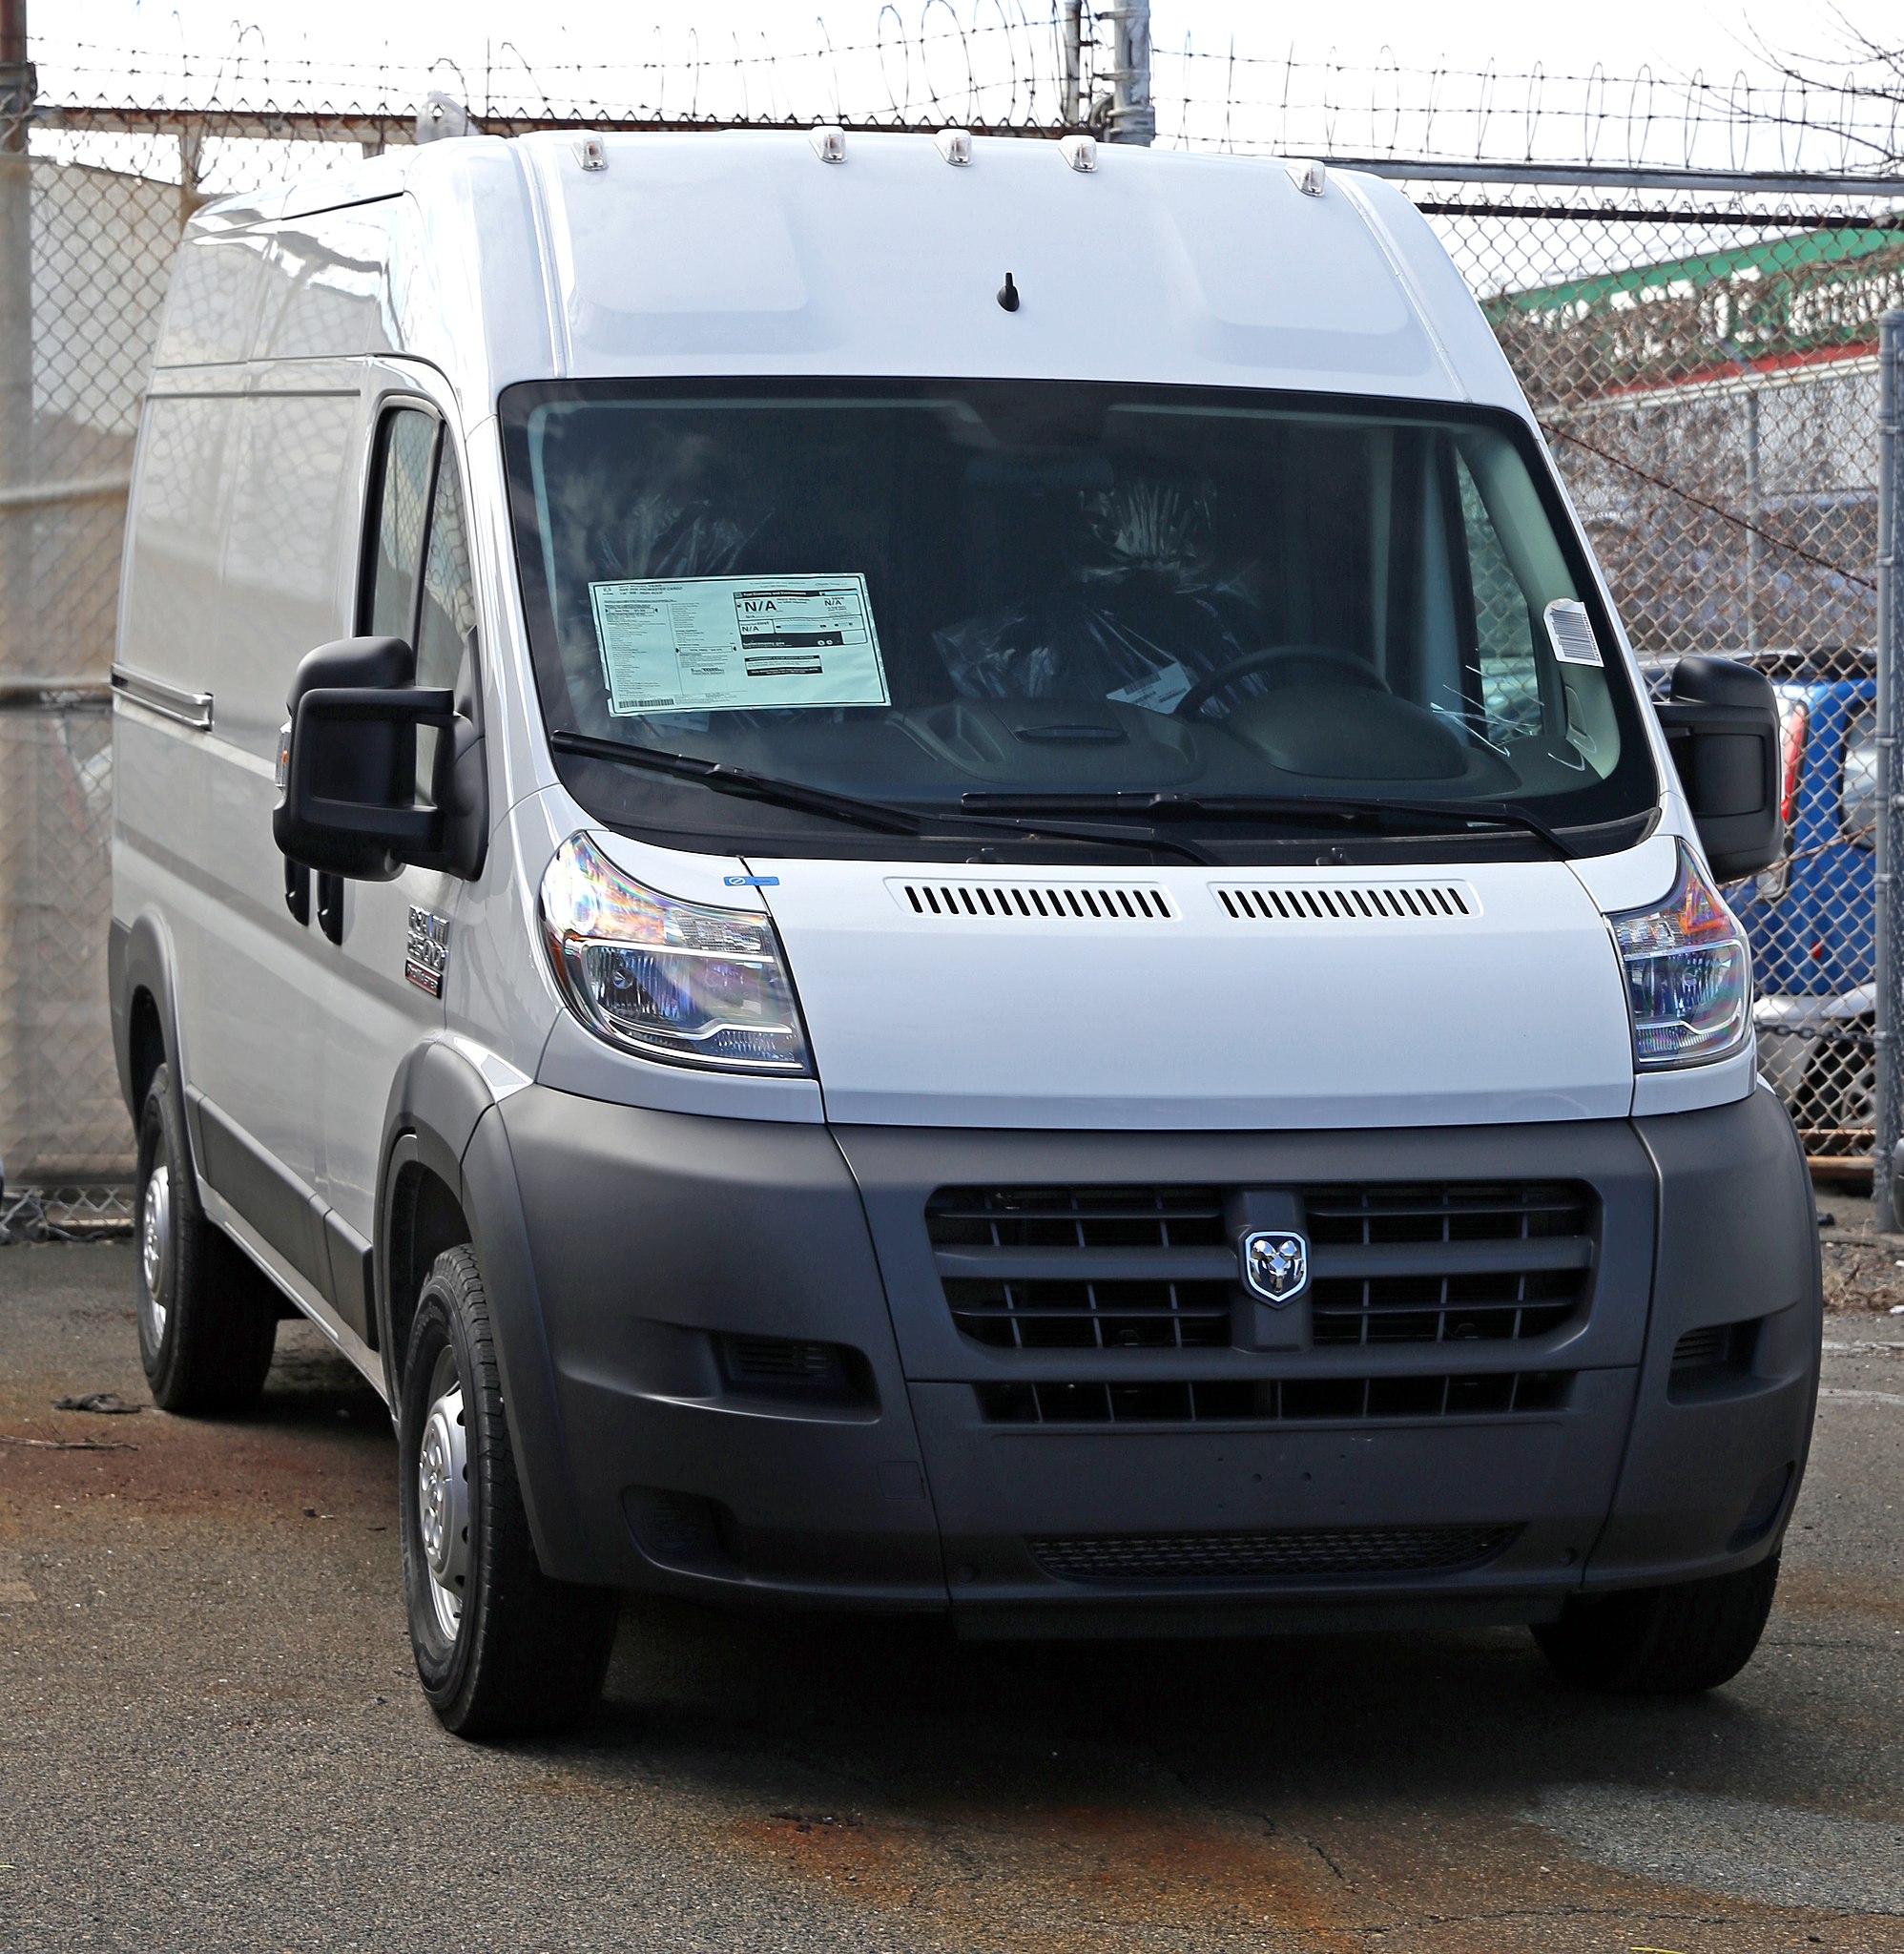 File:2014 Ram 2500 ProMaster Cargo High Roof 136" wb.jpg - Wikimedia Commons